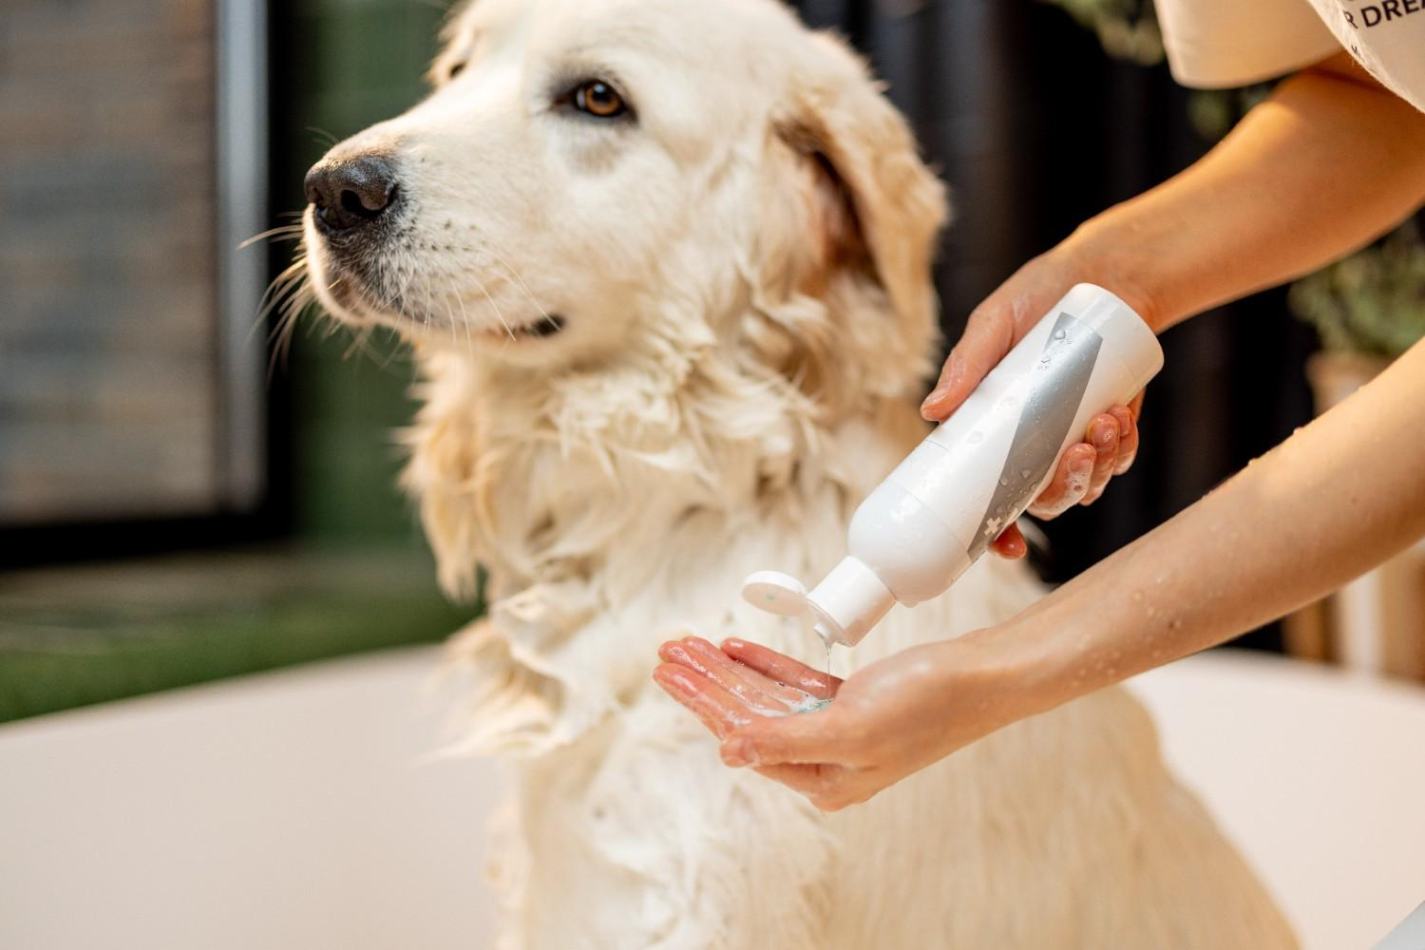 Pet Grooming Supplies: 7 Essential Things for Stress-Free Pet Care